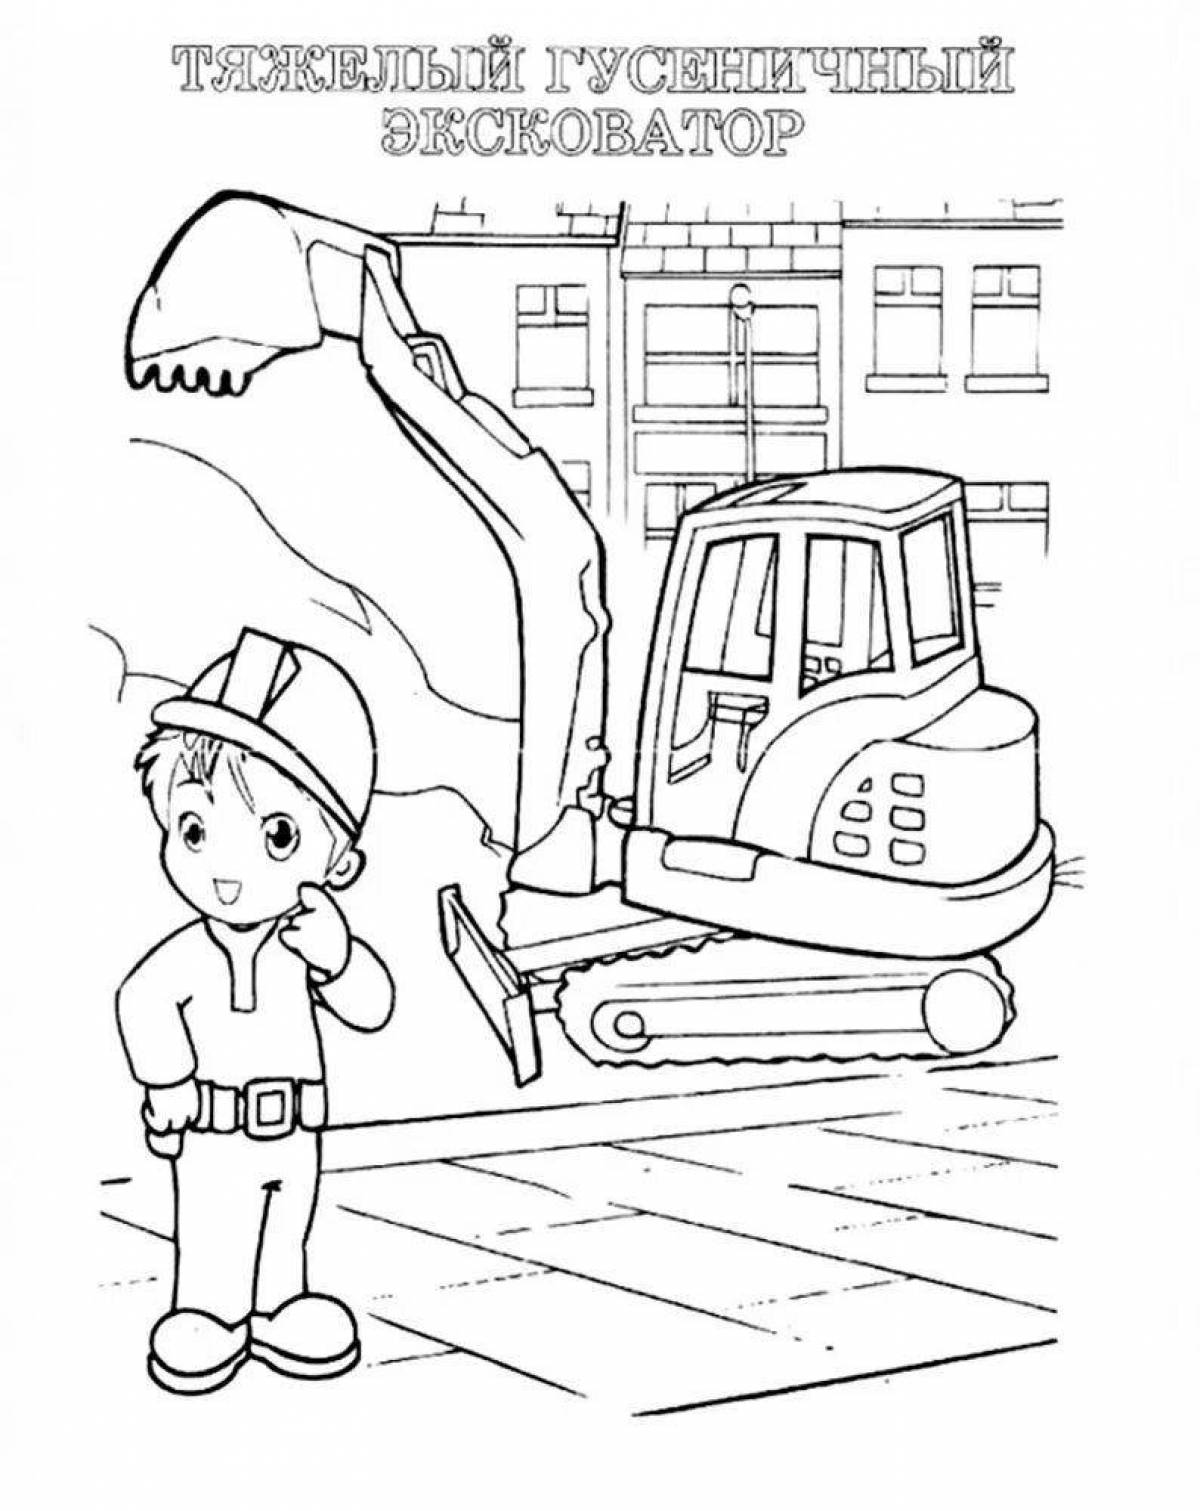 Occupational safety through the eyes of children #25